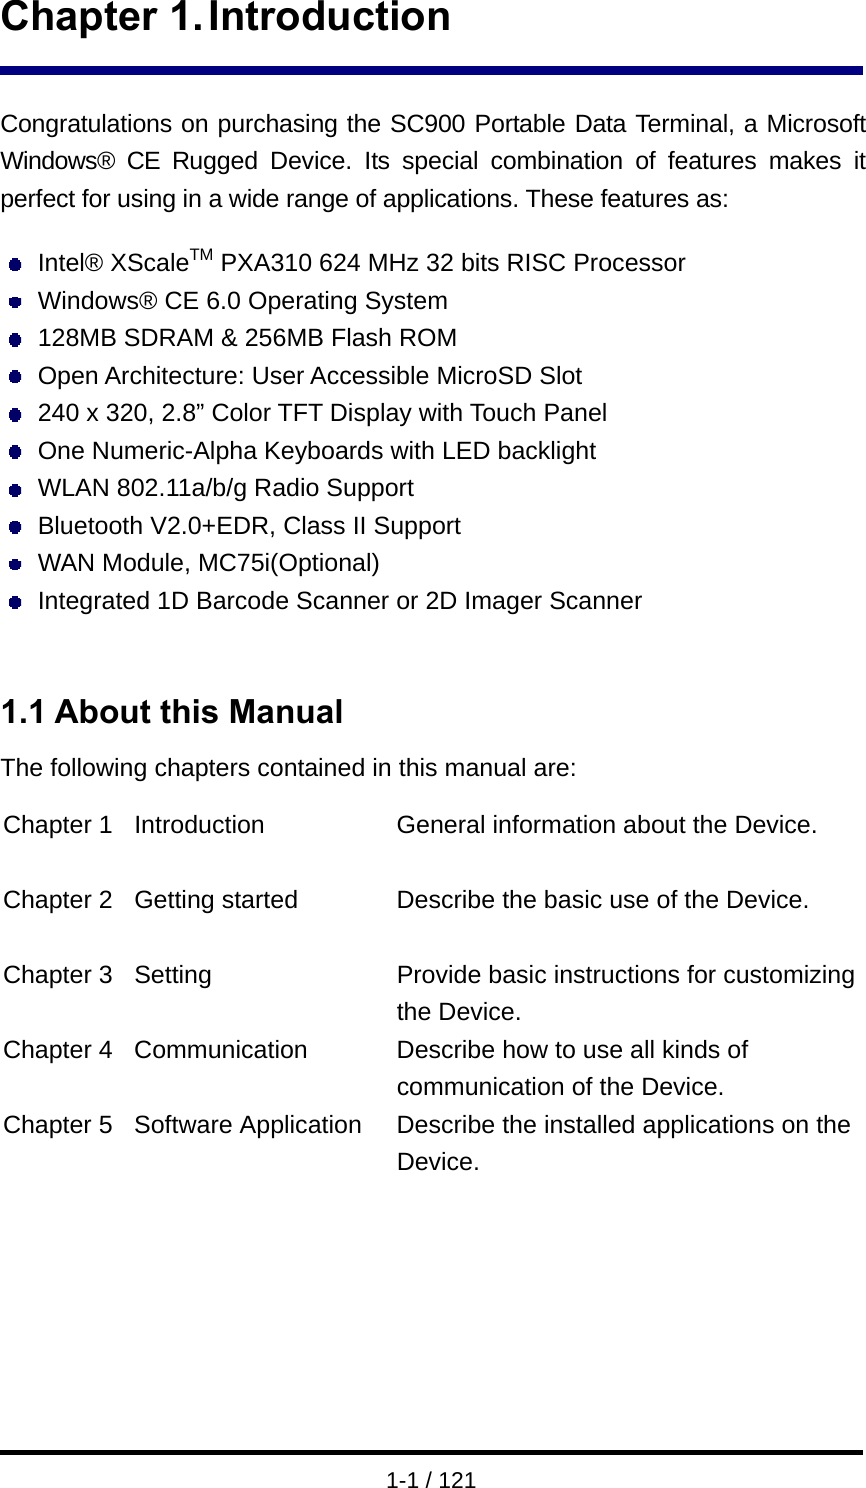  1-1 / 121 Chapter 1. Introduction  Congratulations on purchasing the SC900 Portable Data Terminal, a Microsoft Windows® CE Rugged Device. Its special combination of features makes it perfect for using in a wide range of applications. These features as:     Intel® XScaleTM PXA310 624 MHz 32 bits RISC Processor   Windows® CE 6.0 Operating System   128MB SDRAM &amp; 256MB Flash ROM  Open Architecture: User Accessible MicroSD Slot   240 x 320, 2.8” Color TFT Display with Touch Panel   One Numeric-Alpha Keyboards with LED backlight   WLAN 802.11a/b/g Radio Support   Bluetooth V2.0+EDR, Class II Support   WAN Module, MC75i(Optional)   Integrated 1D Barcode Scanner or 2D Imager Scanner   1.1 About this Manual The following chapters contained in this manual are:  Chapter 1  Introduction  General information about the Device.  Chapter 2  Getting started  Describe the basic use of the Device.  Chapter 3  Setting  Provide basic instructions for customizing the Device. Chapter 4  Communication  Describe how to use all kinds of communication of the Device. Chapter 5  Software Application  Describe the installed applications on the Device.       